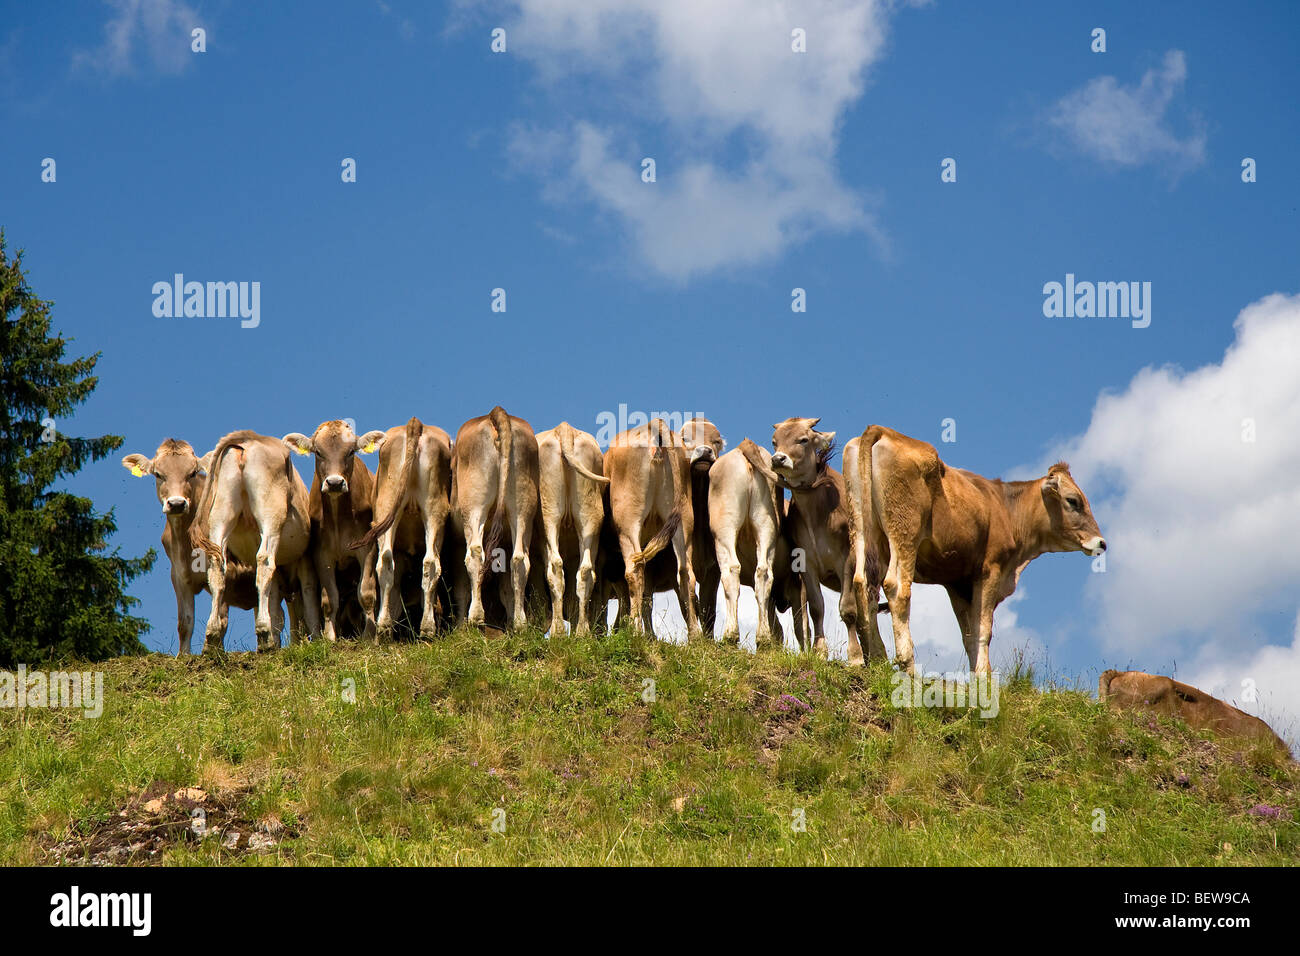 Cows in a row on brow of a hill, Allgau, Germany Stock Photo